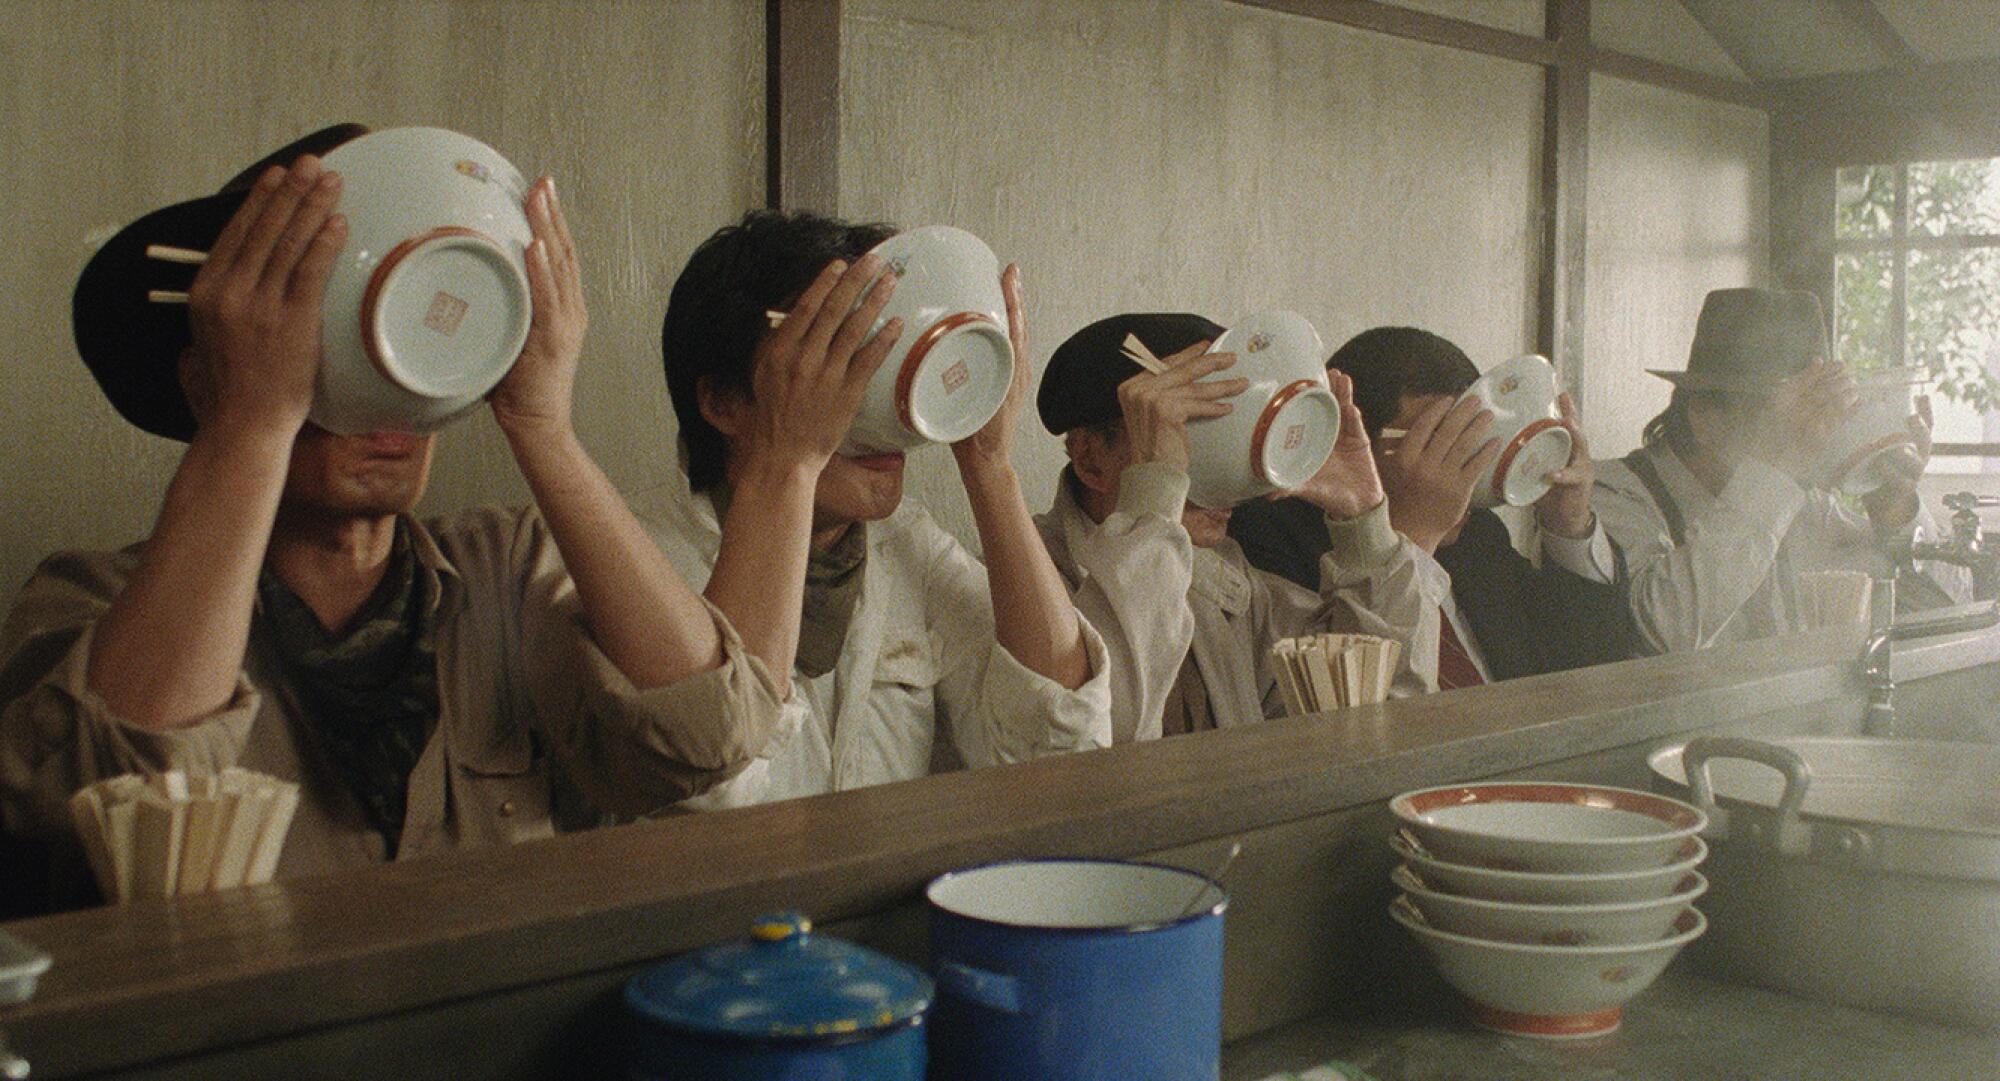 A line of customers at the counter of a ramen restaurant hold bowls of soup up to their mouths.